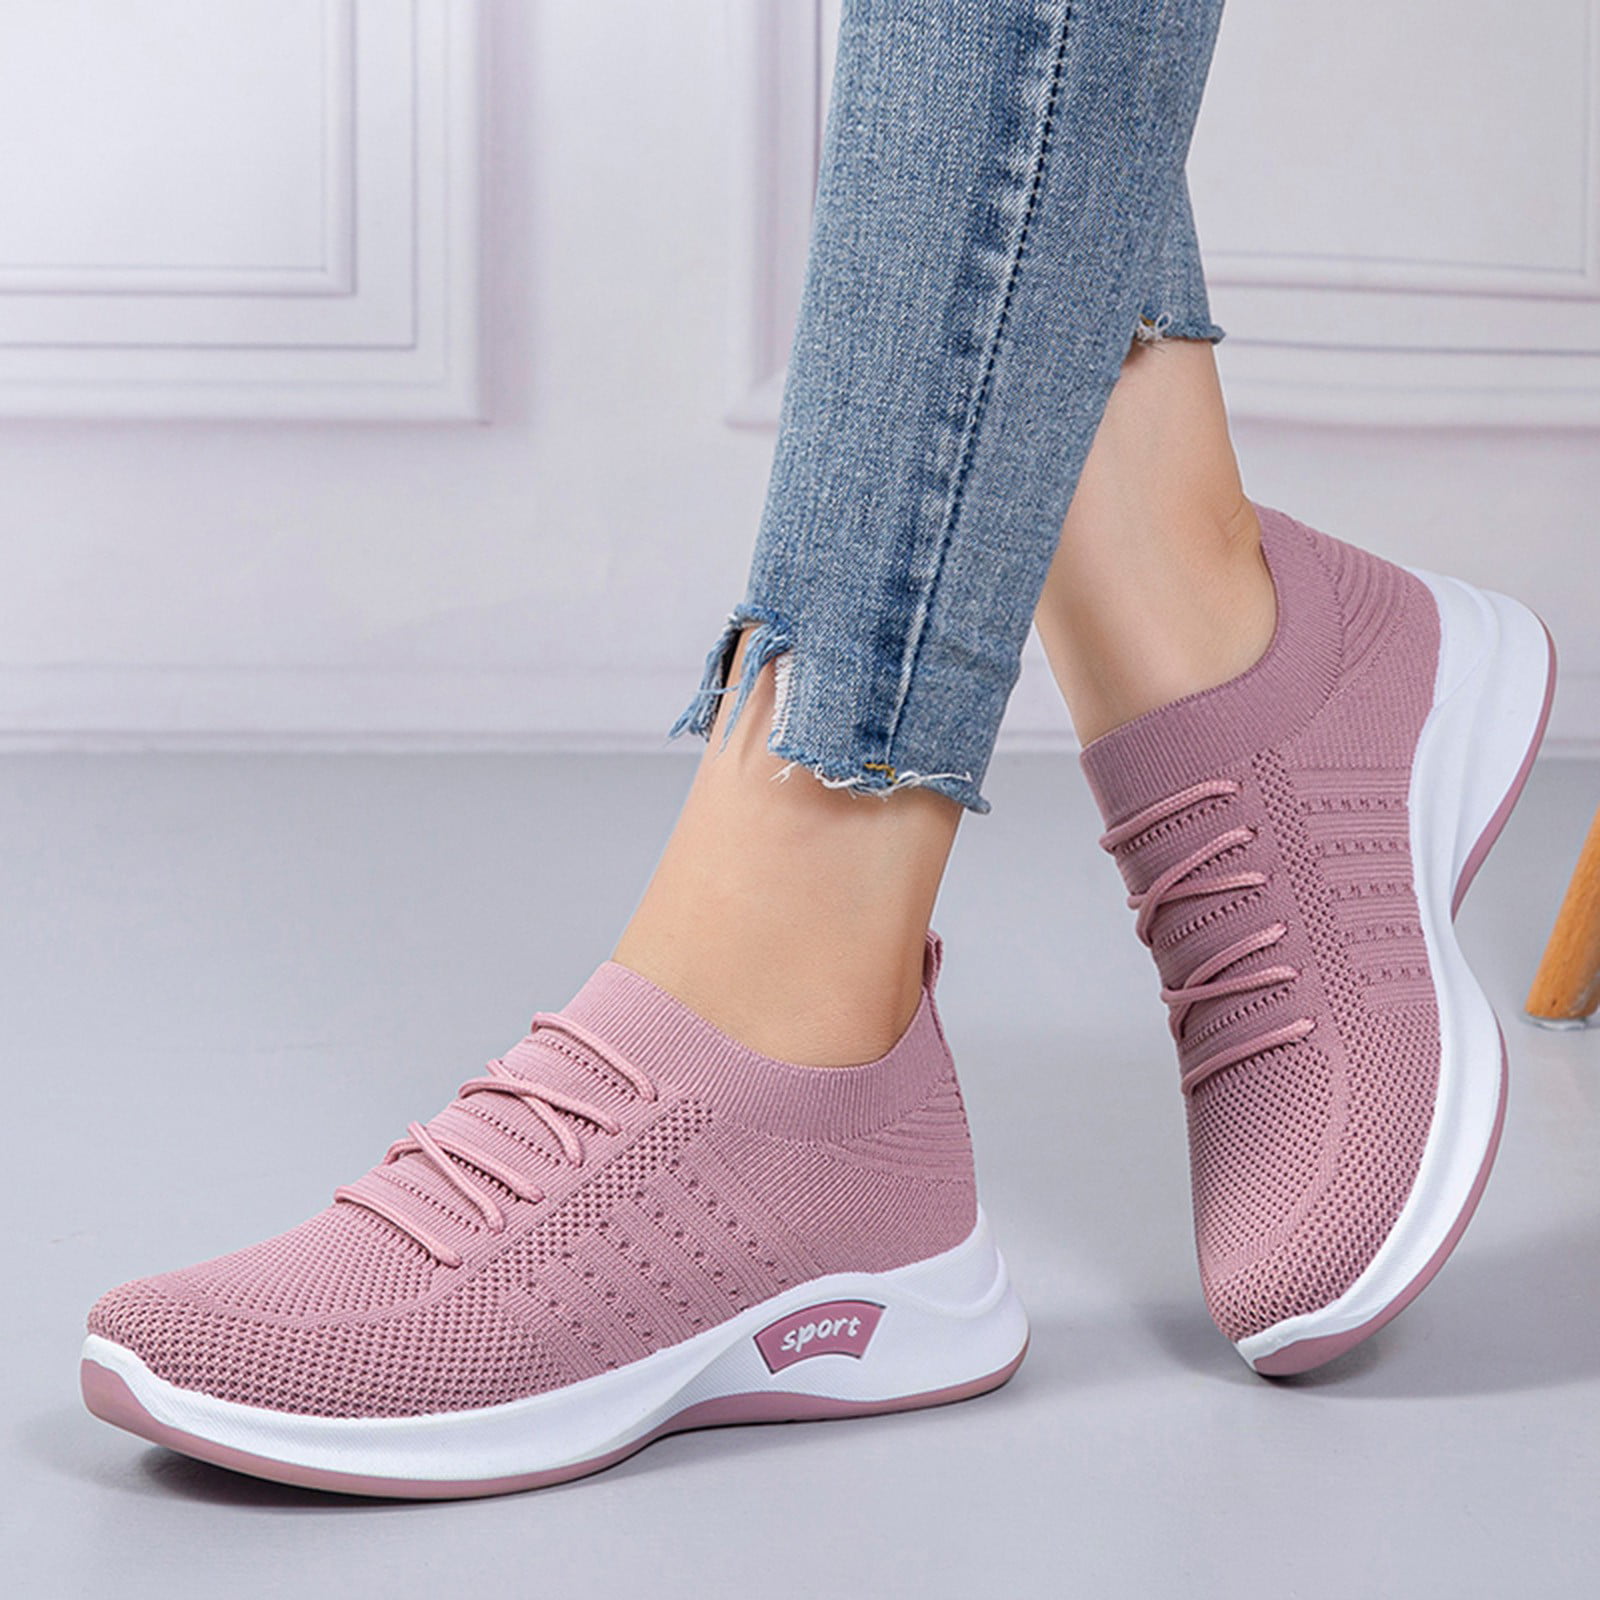 Women's Casual Shoes - Lifestyle, Comfortable Footwear